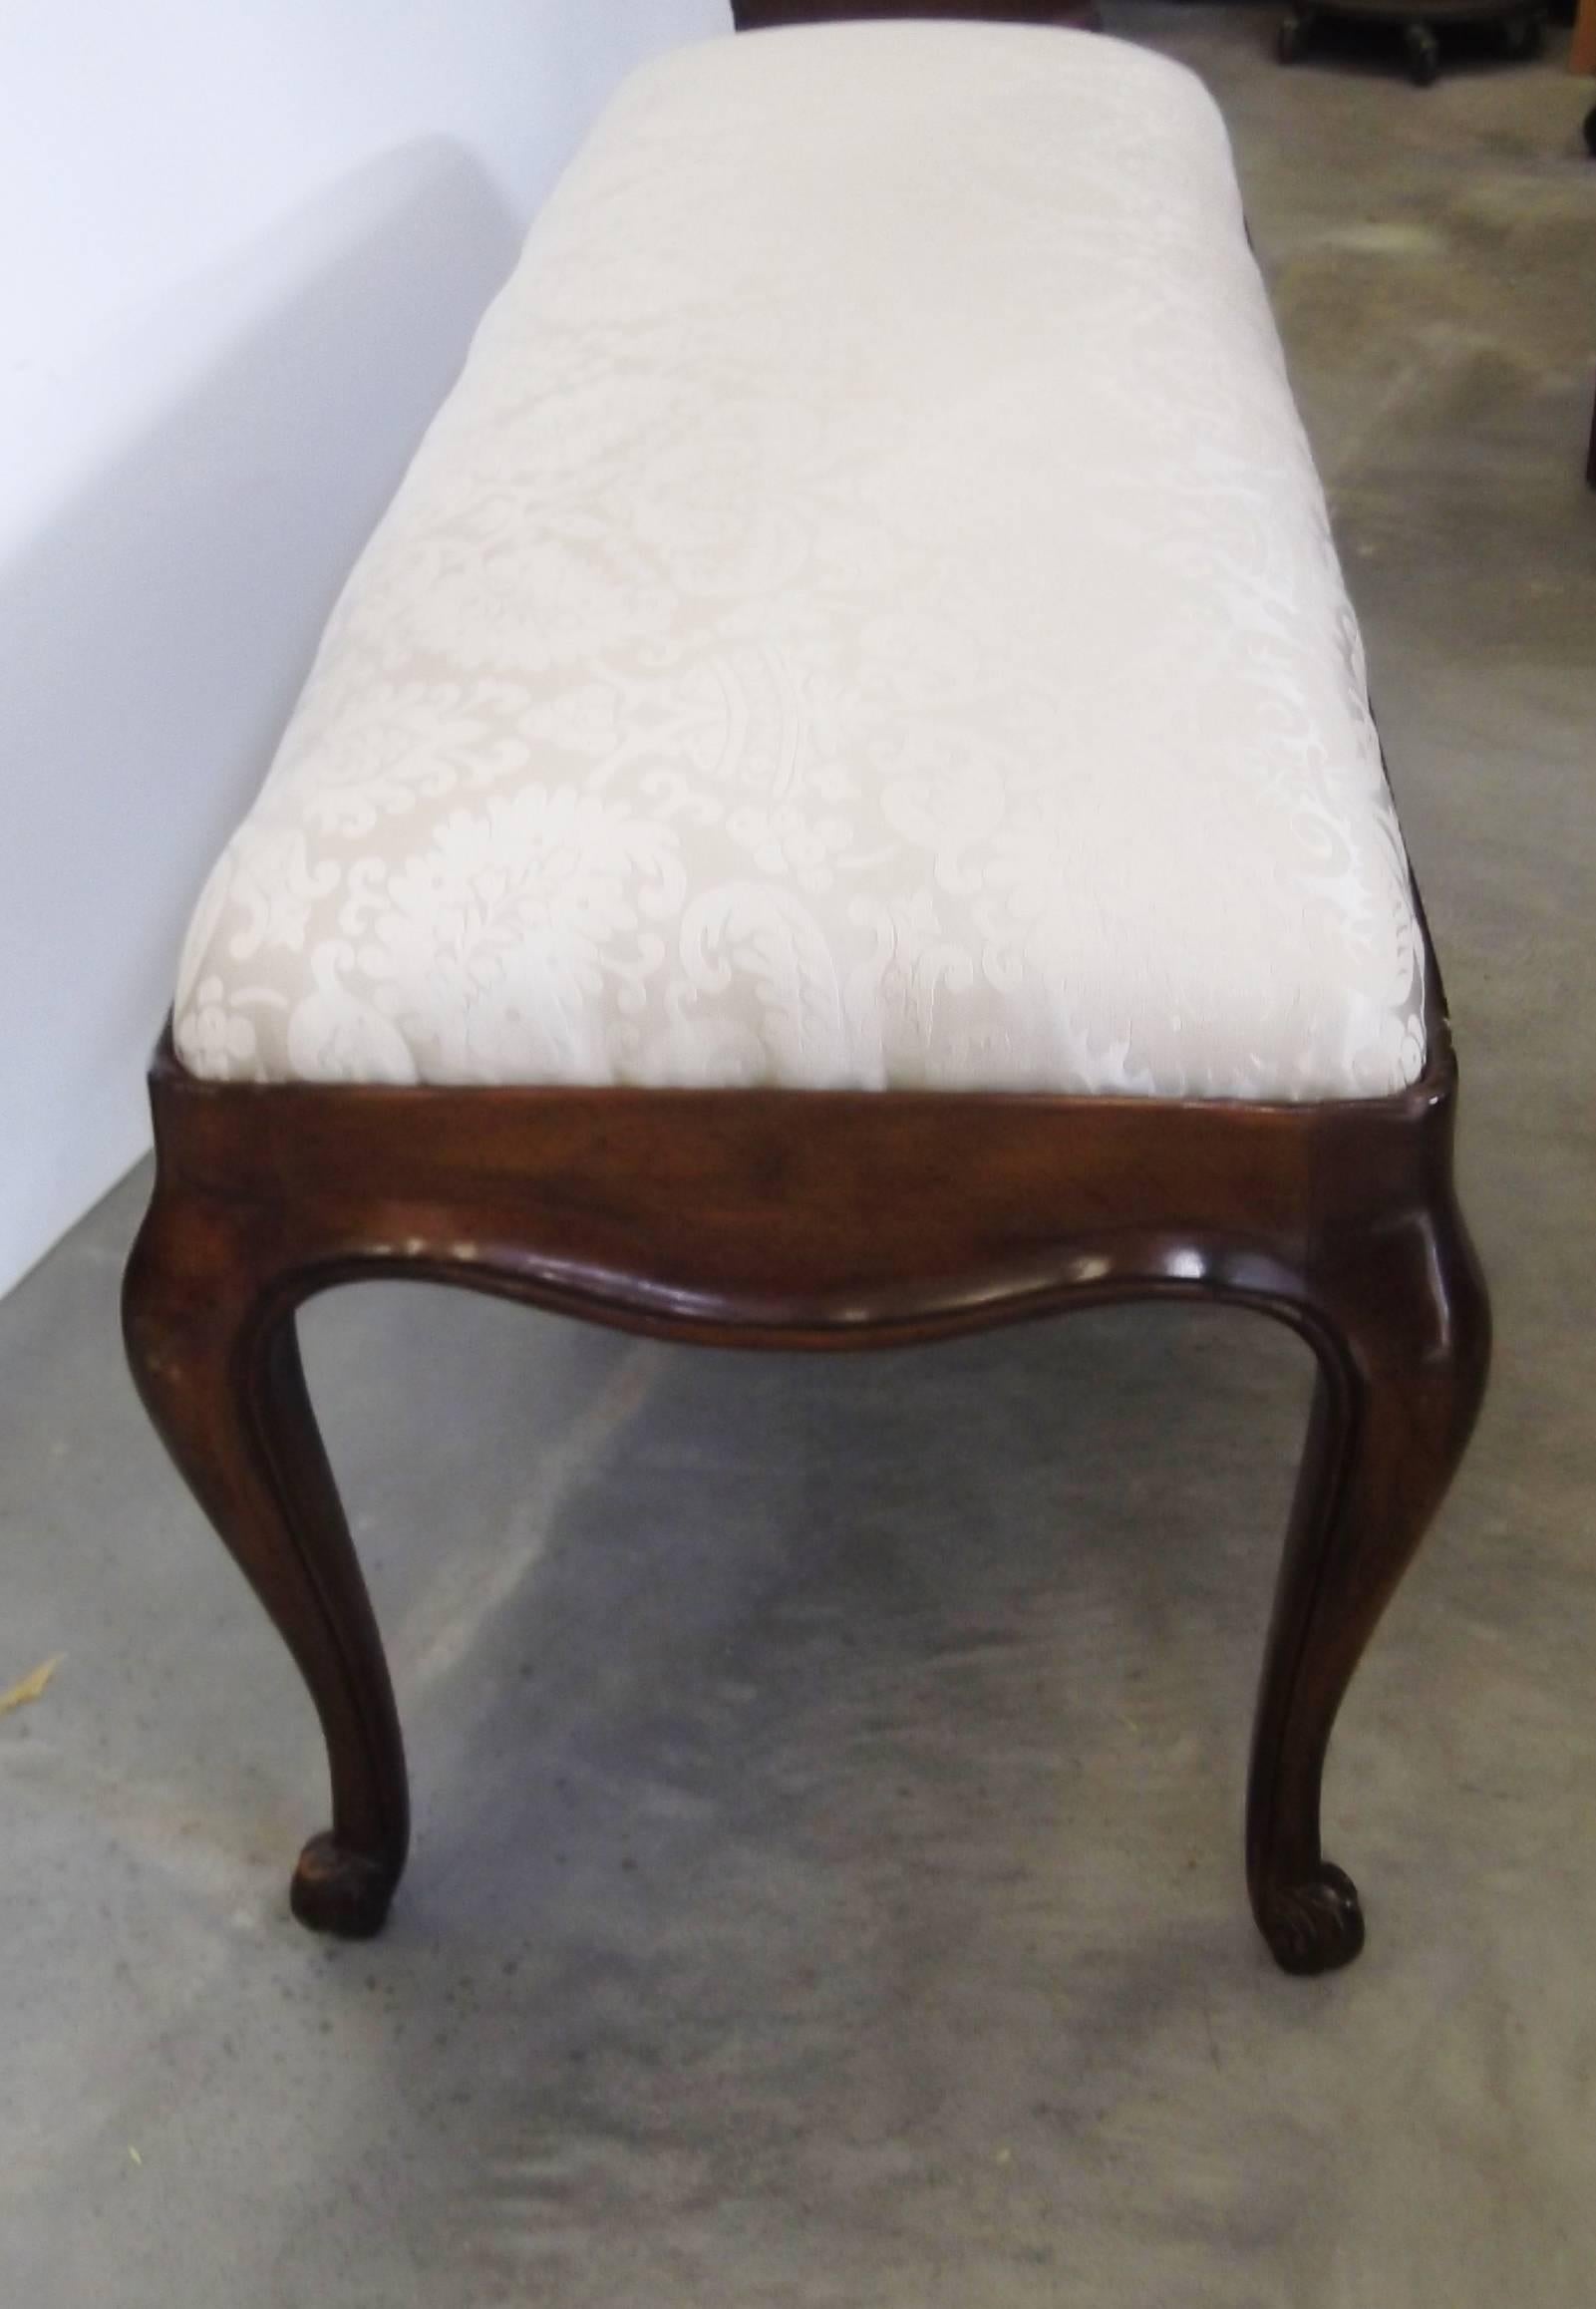 Elegant dark walnut hand-carved bench. Classic cabriole legs with scrolled feet and nice carved detail on the apron. Newly covered in a light butter colored damask.